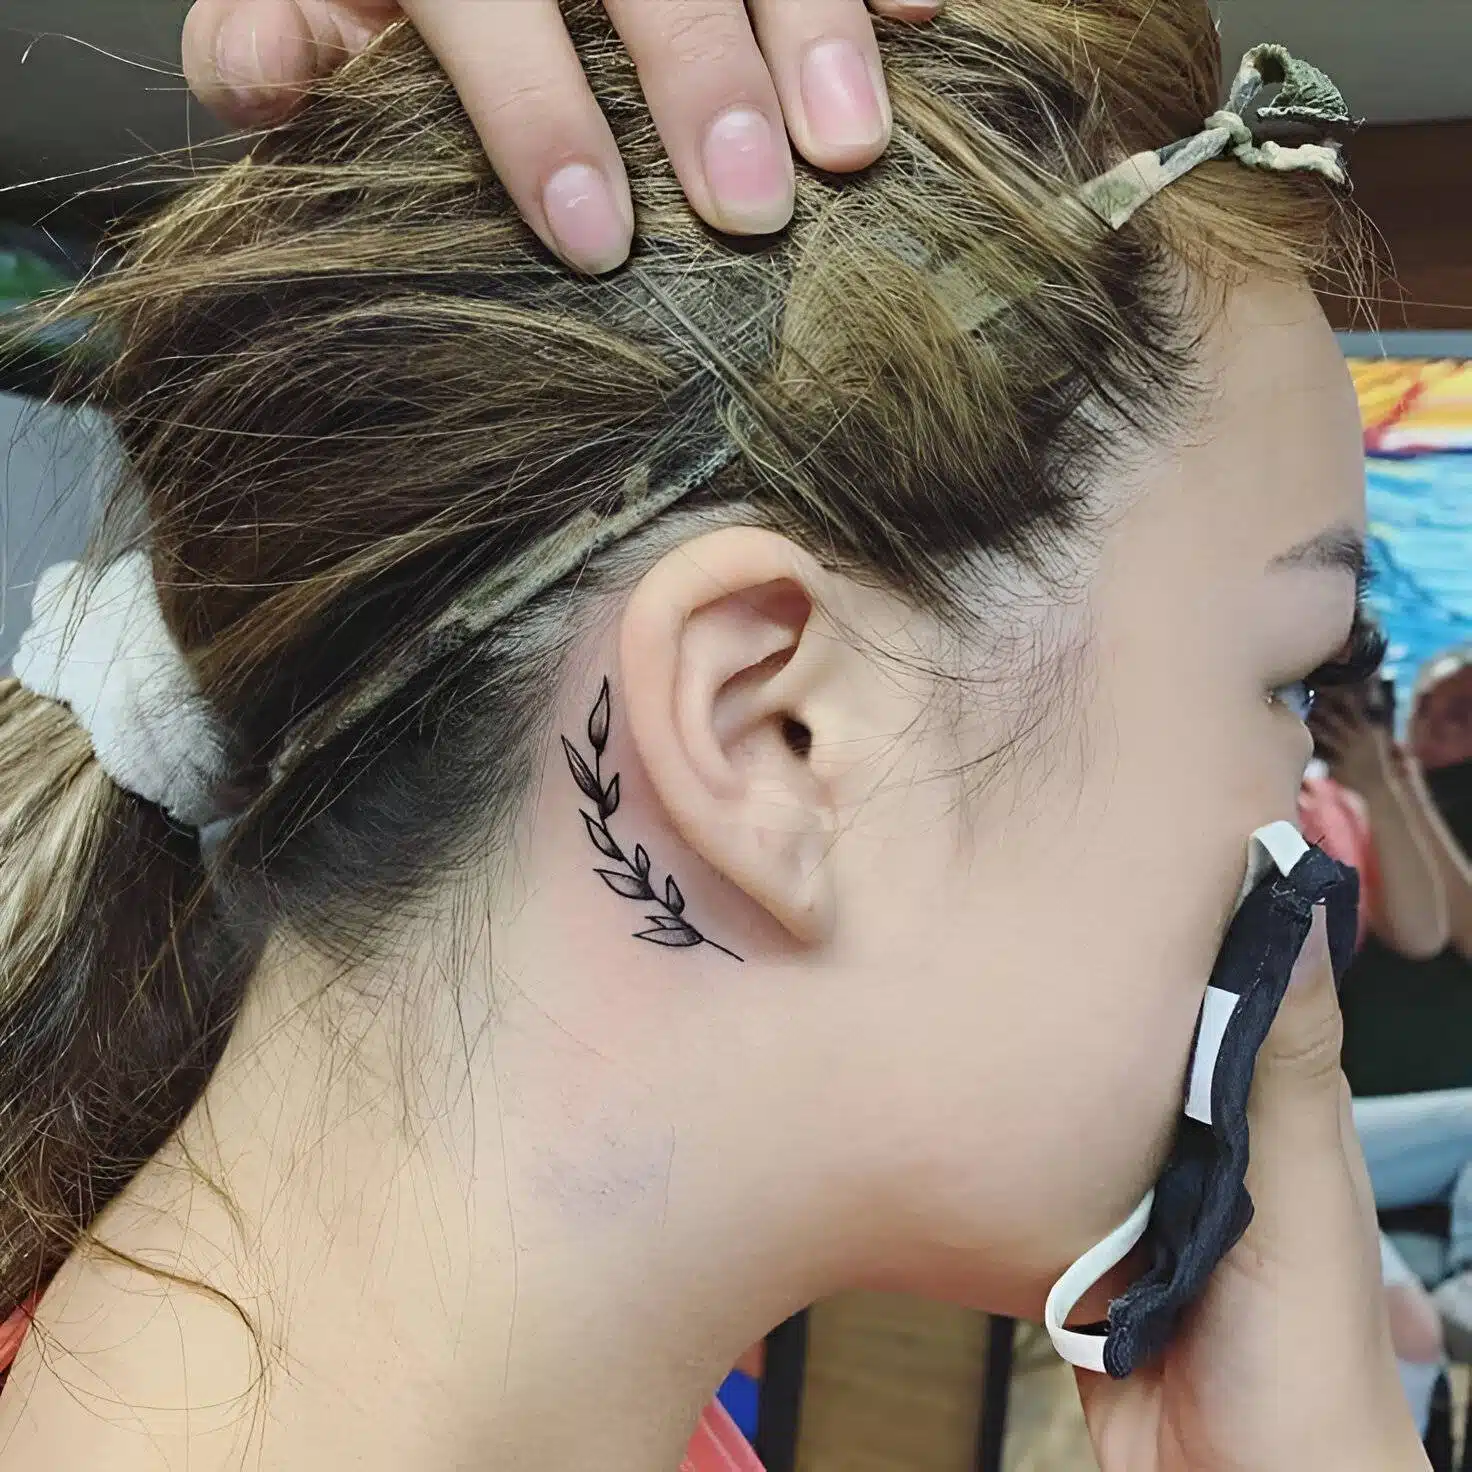 25 Low-key Stunning Behind The Ear Tattoos To Get ASAP - 171